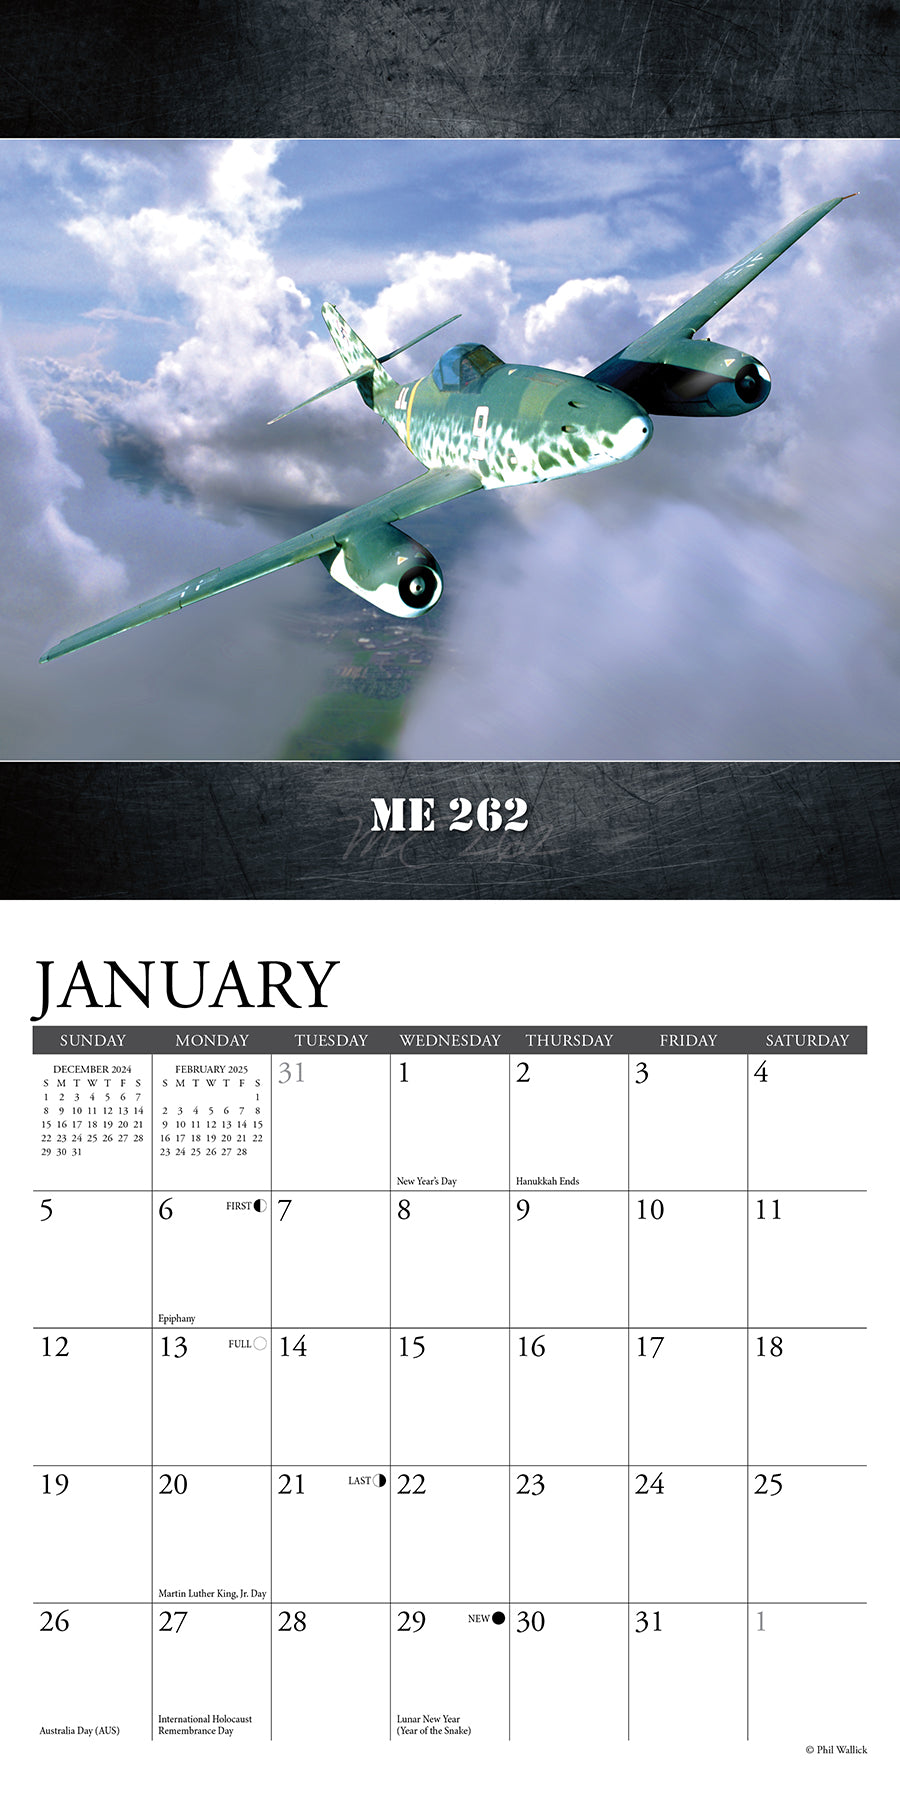 2025 WWII Military Aircraft - Mini Wall Calendar (US Only)